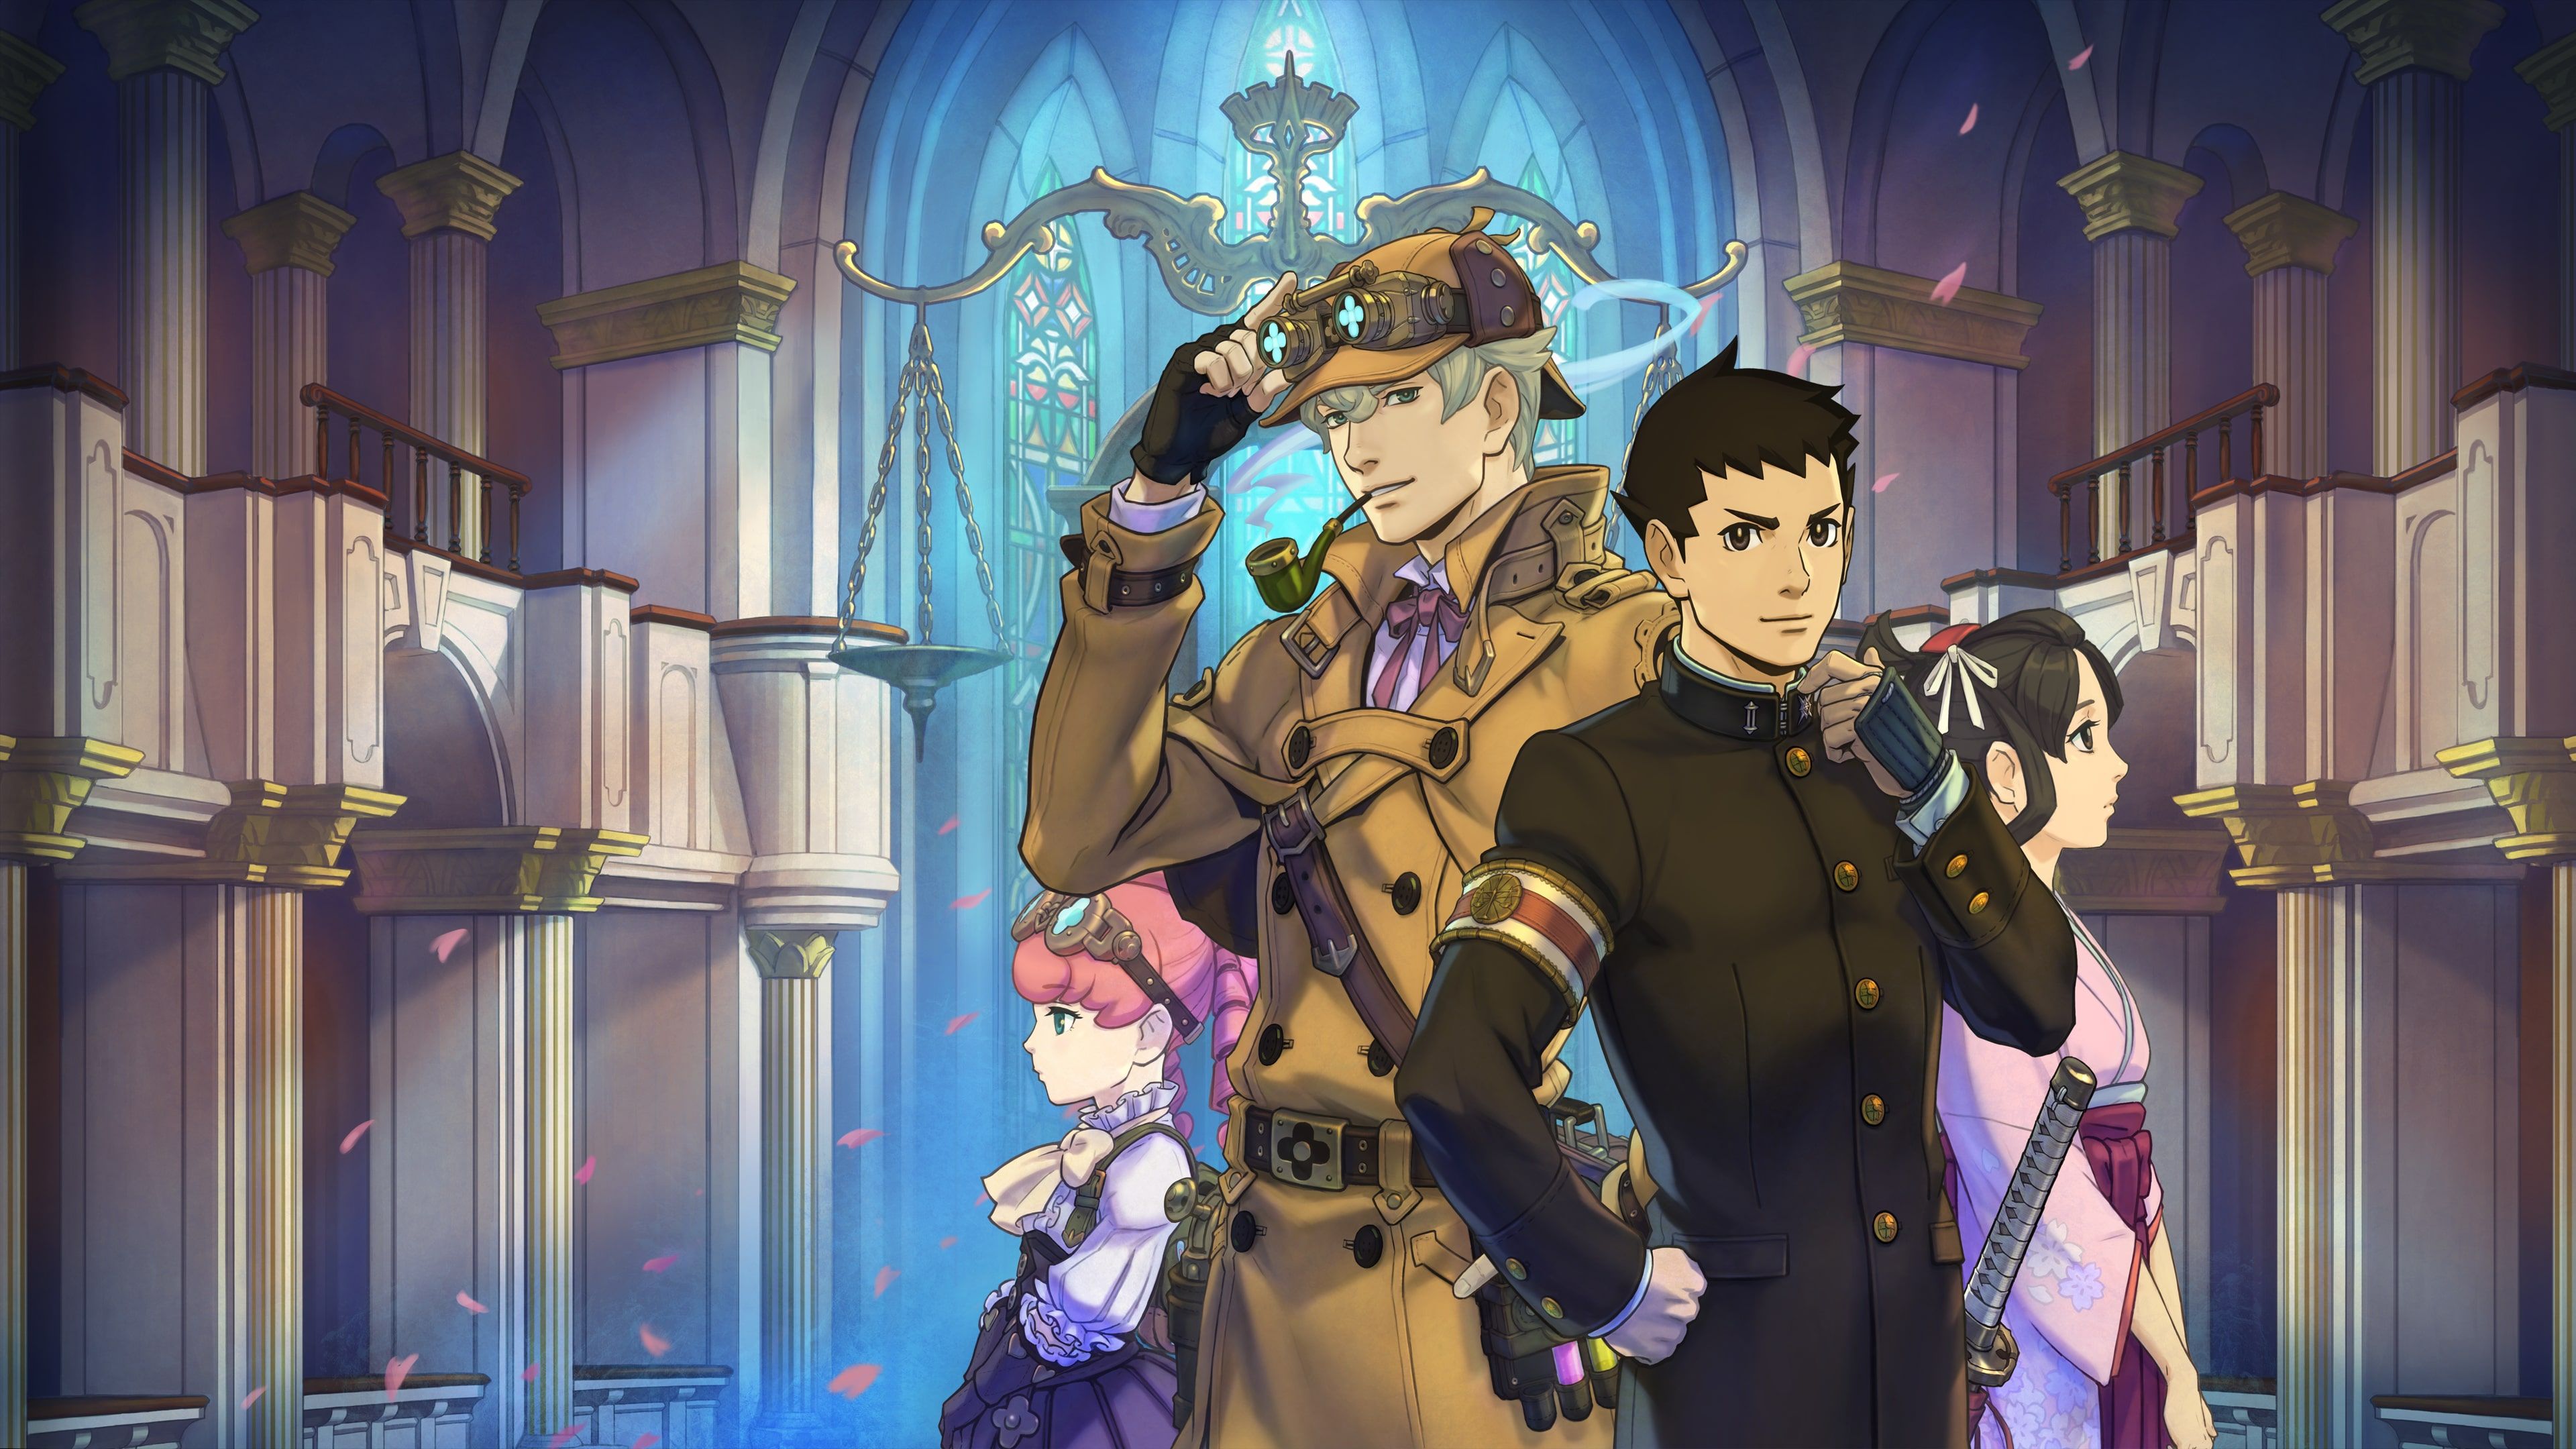 The Great Ace Attorney Chronicles cover image